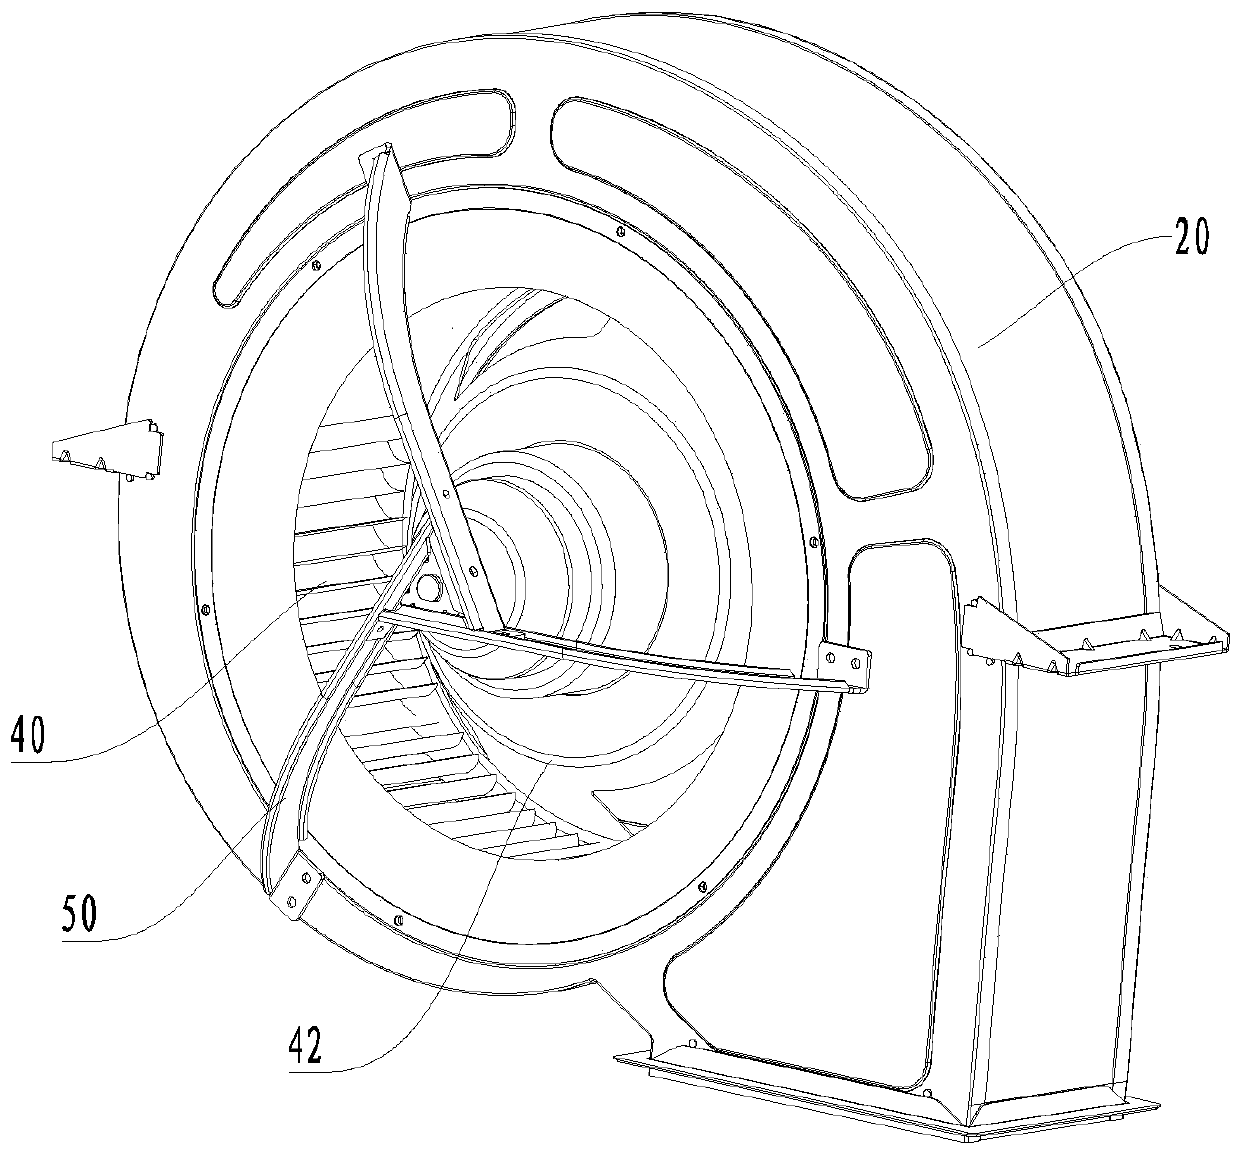 Centrifugal fan and electrical equipment